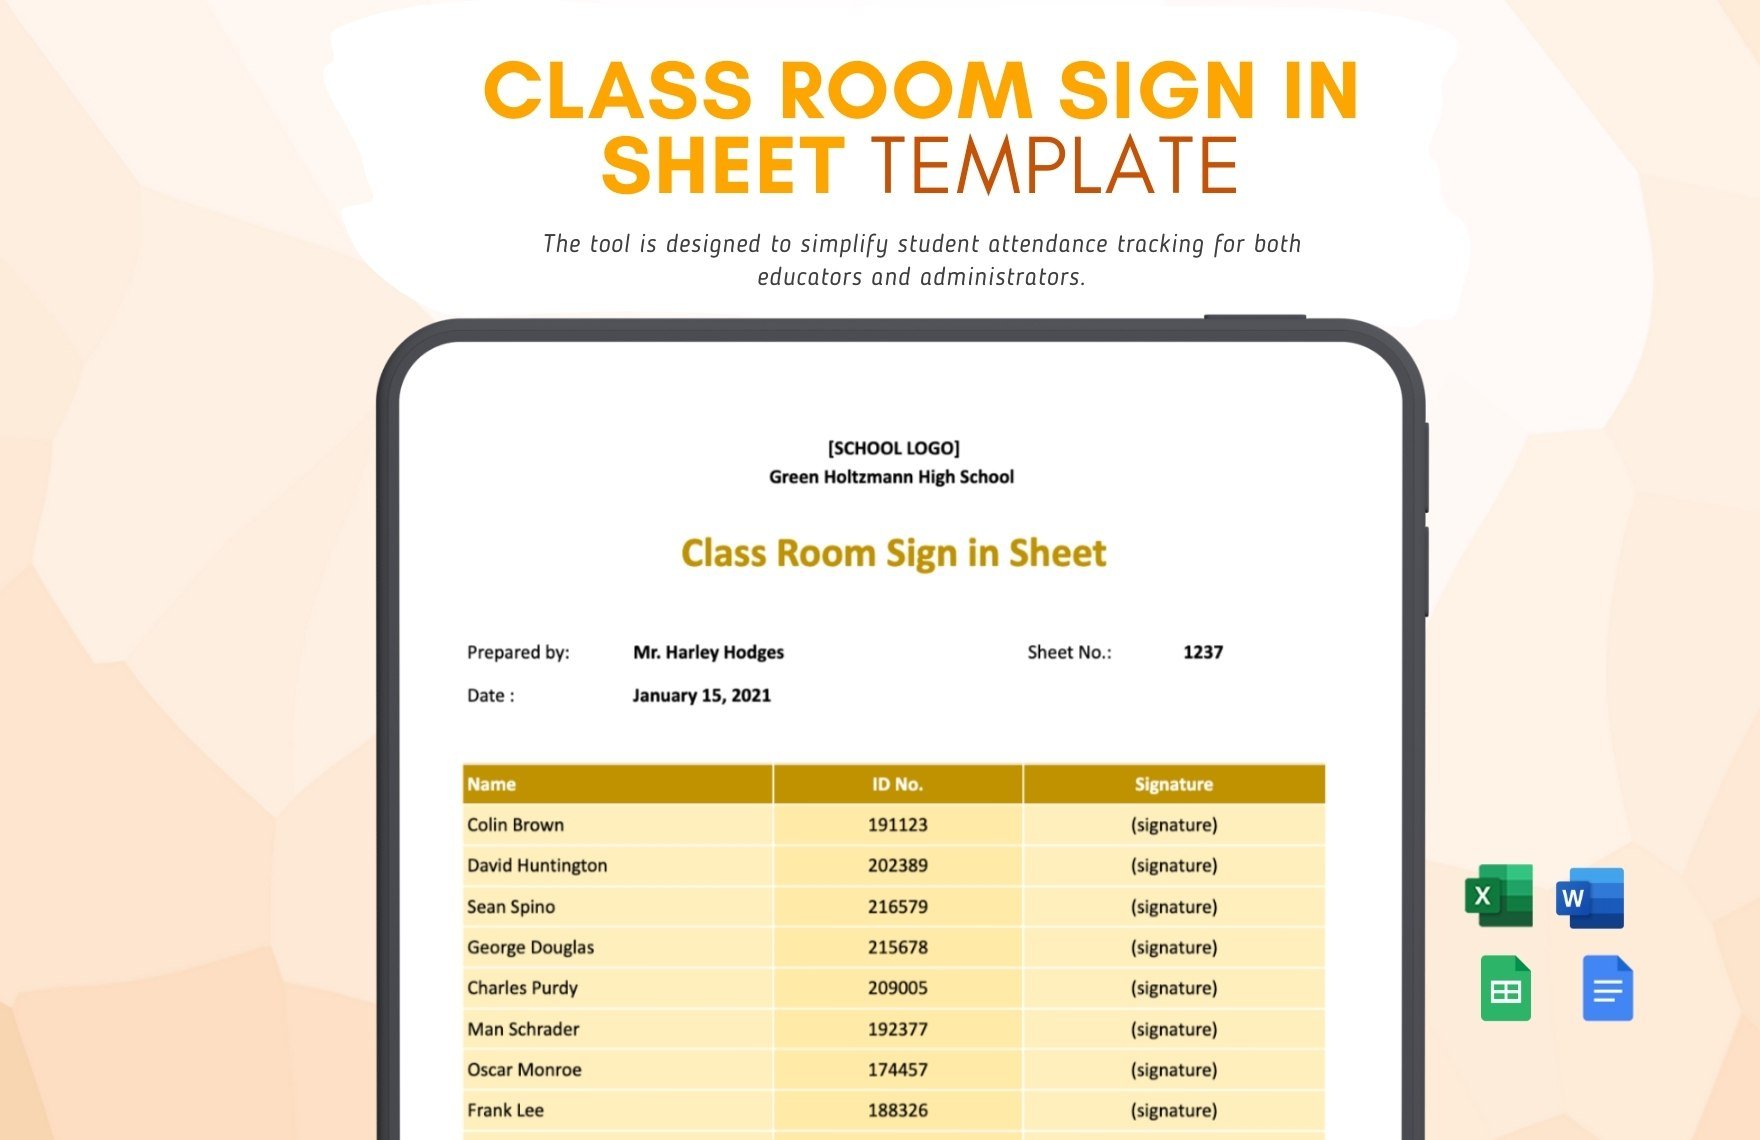 Class Room Sign in Sheet Template